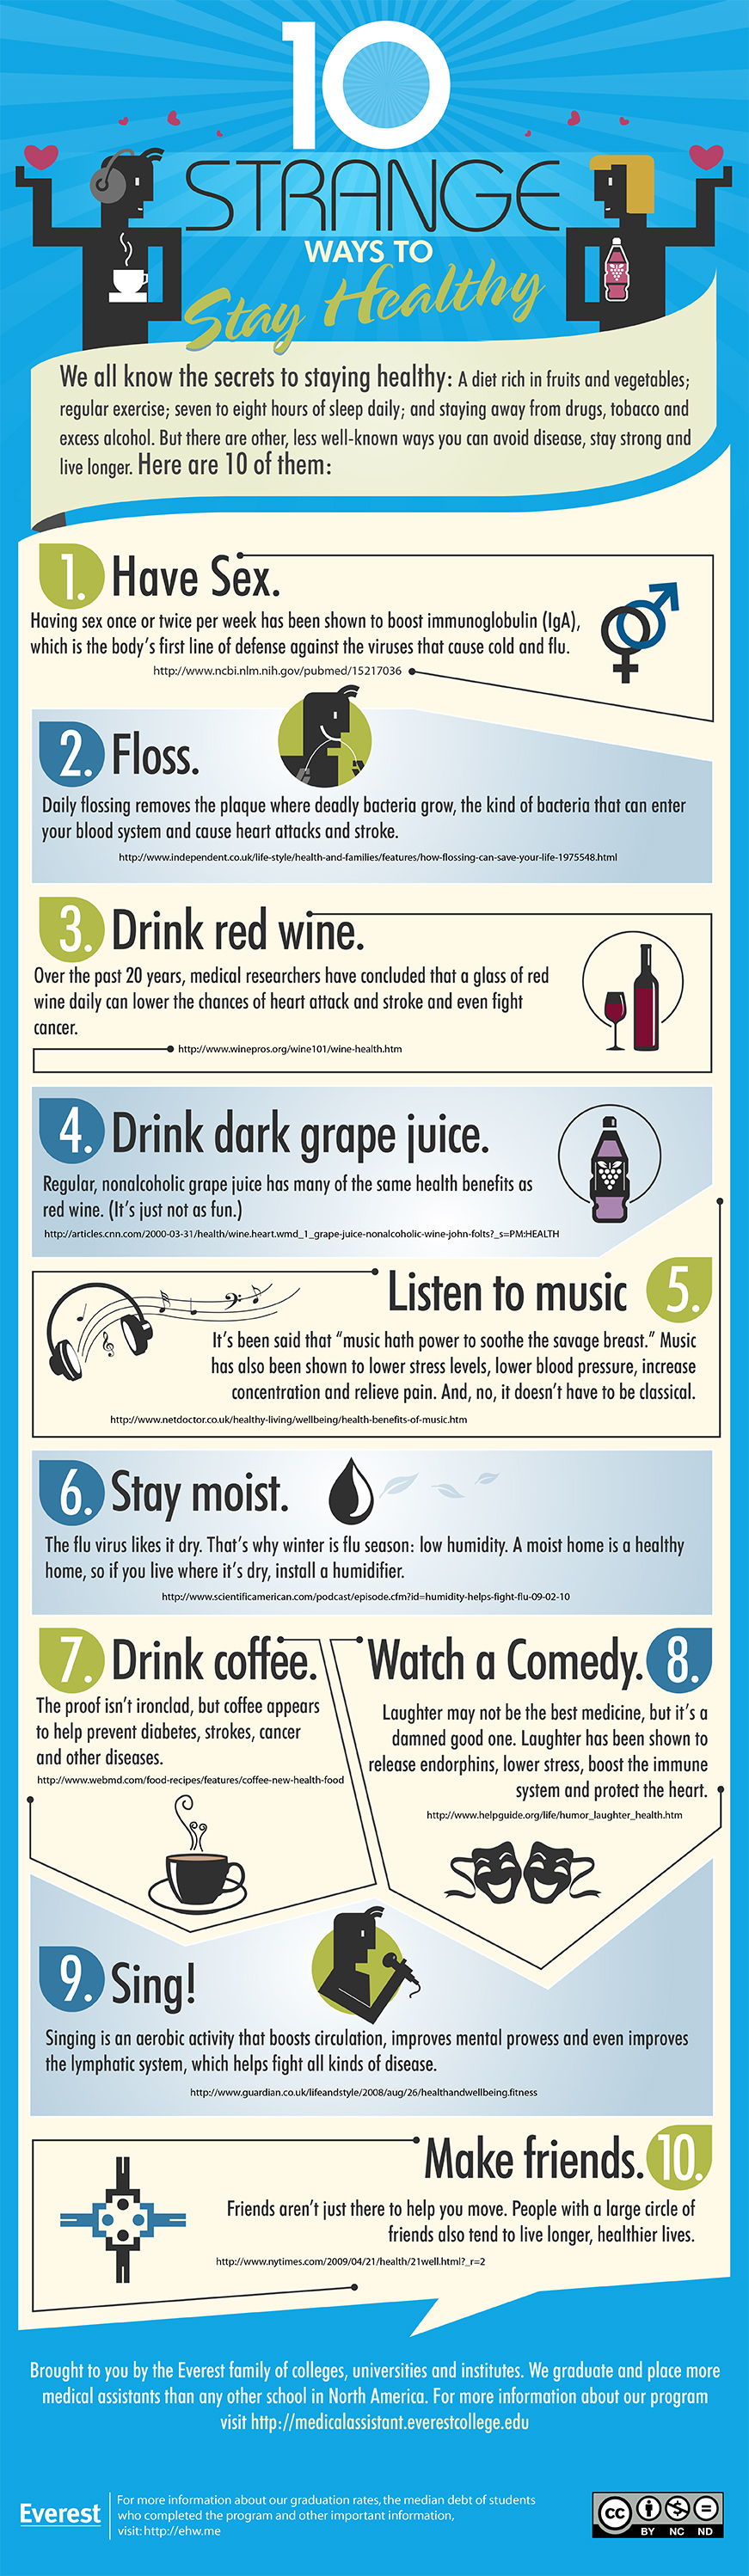 http://dailyinfographic.com/10-strange-ways-to-stay-healthy-infographic